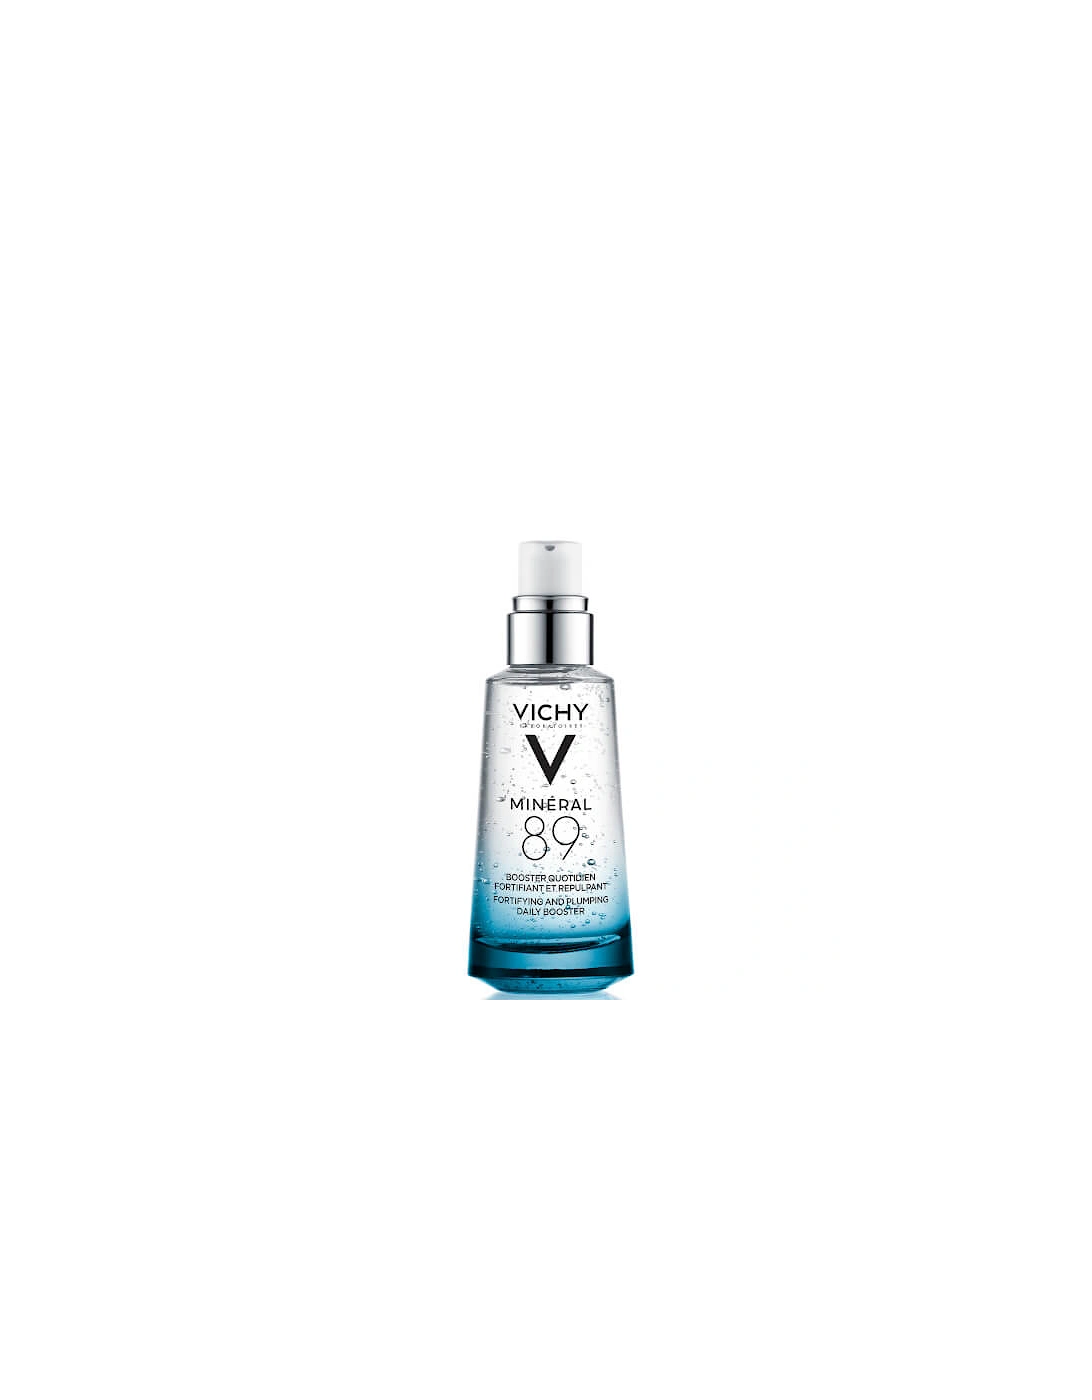 Minéral 89 Hyaluronic Acid Hydrating Serum - Hypoallergenic, for All Skin Types 75ml - - Minéral 89 Hyaluronic Acid Hydrating Serum - Hypoallergenic, for All Skin Types 75ml - Denise, 2 of 1